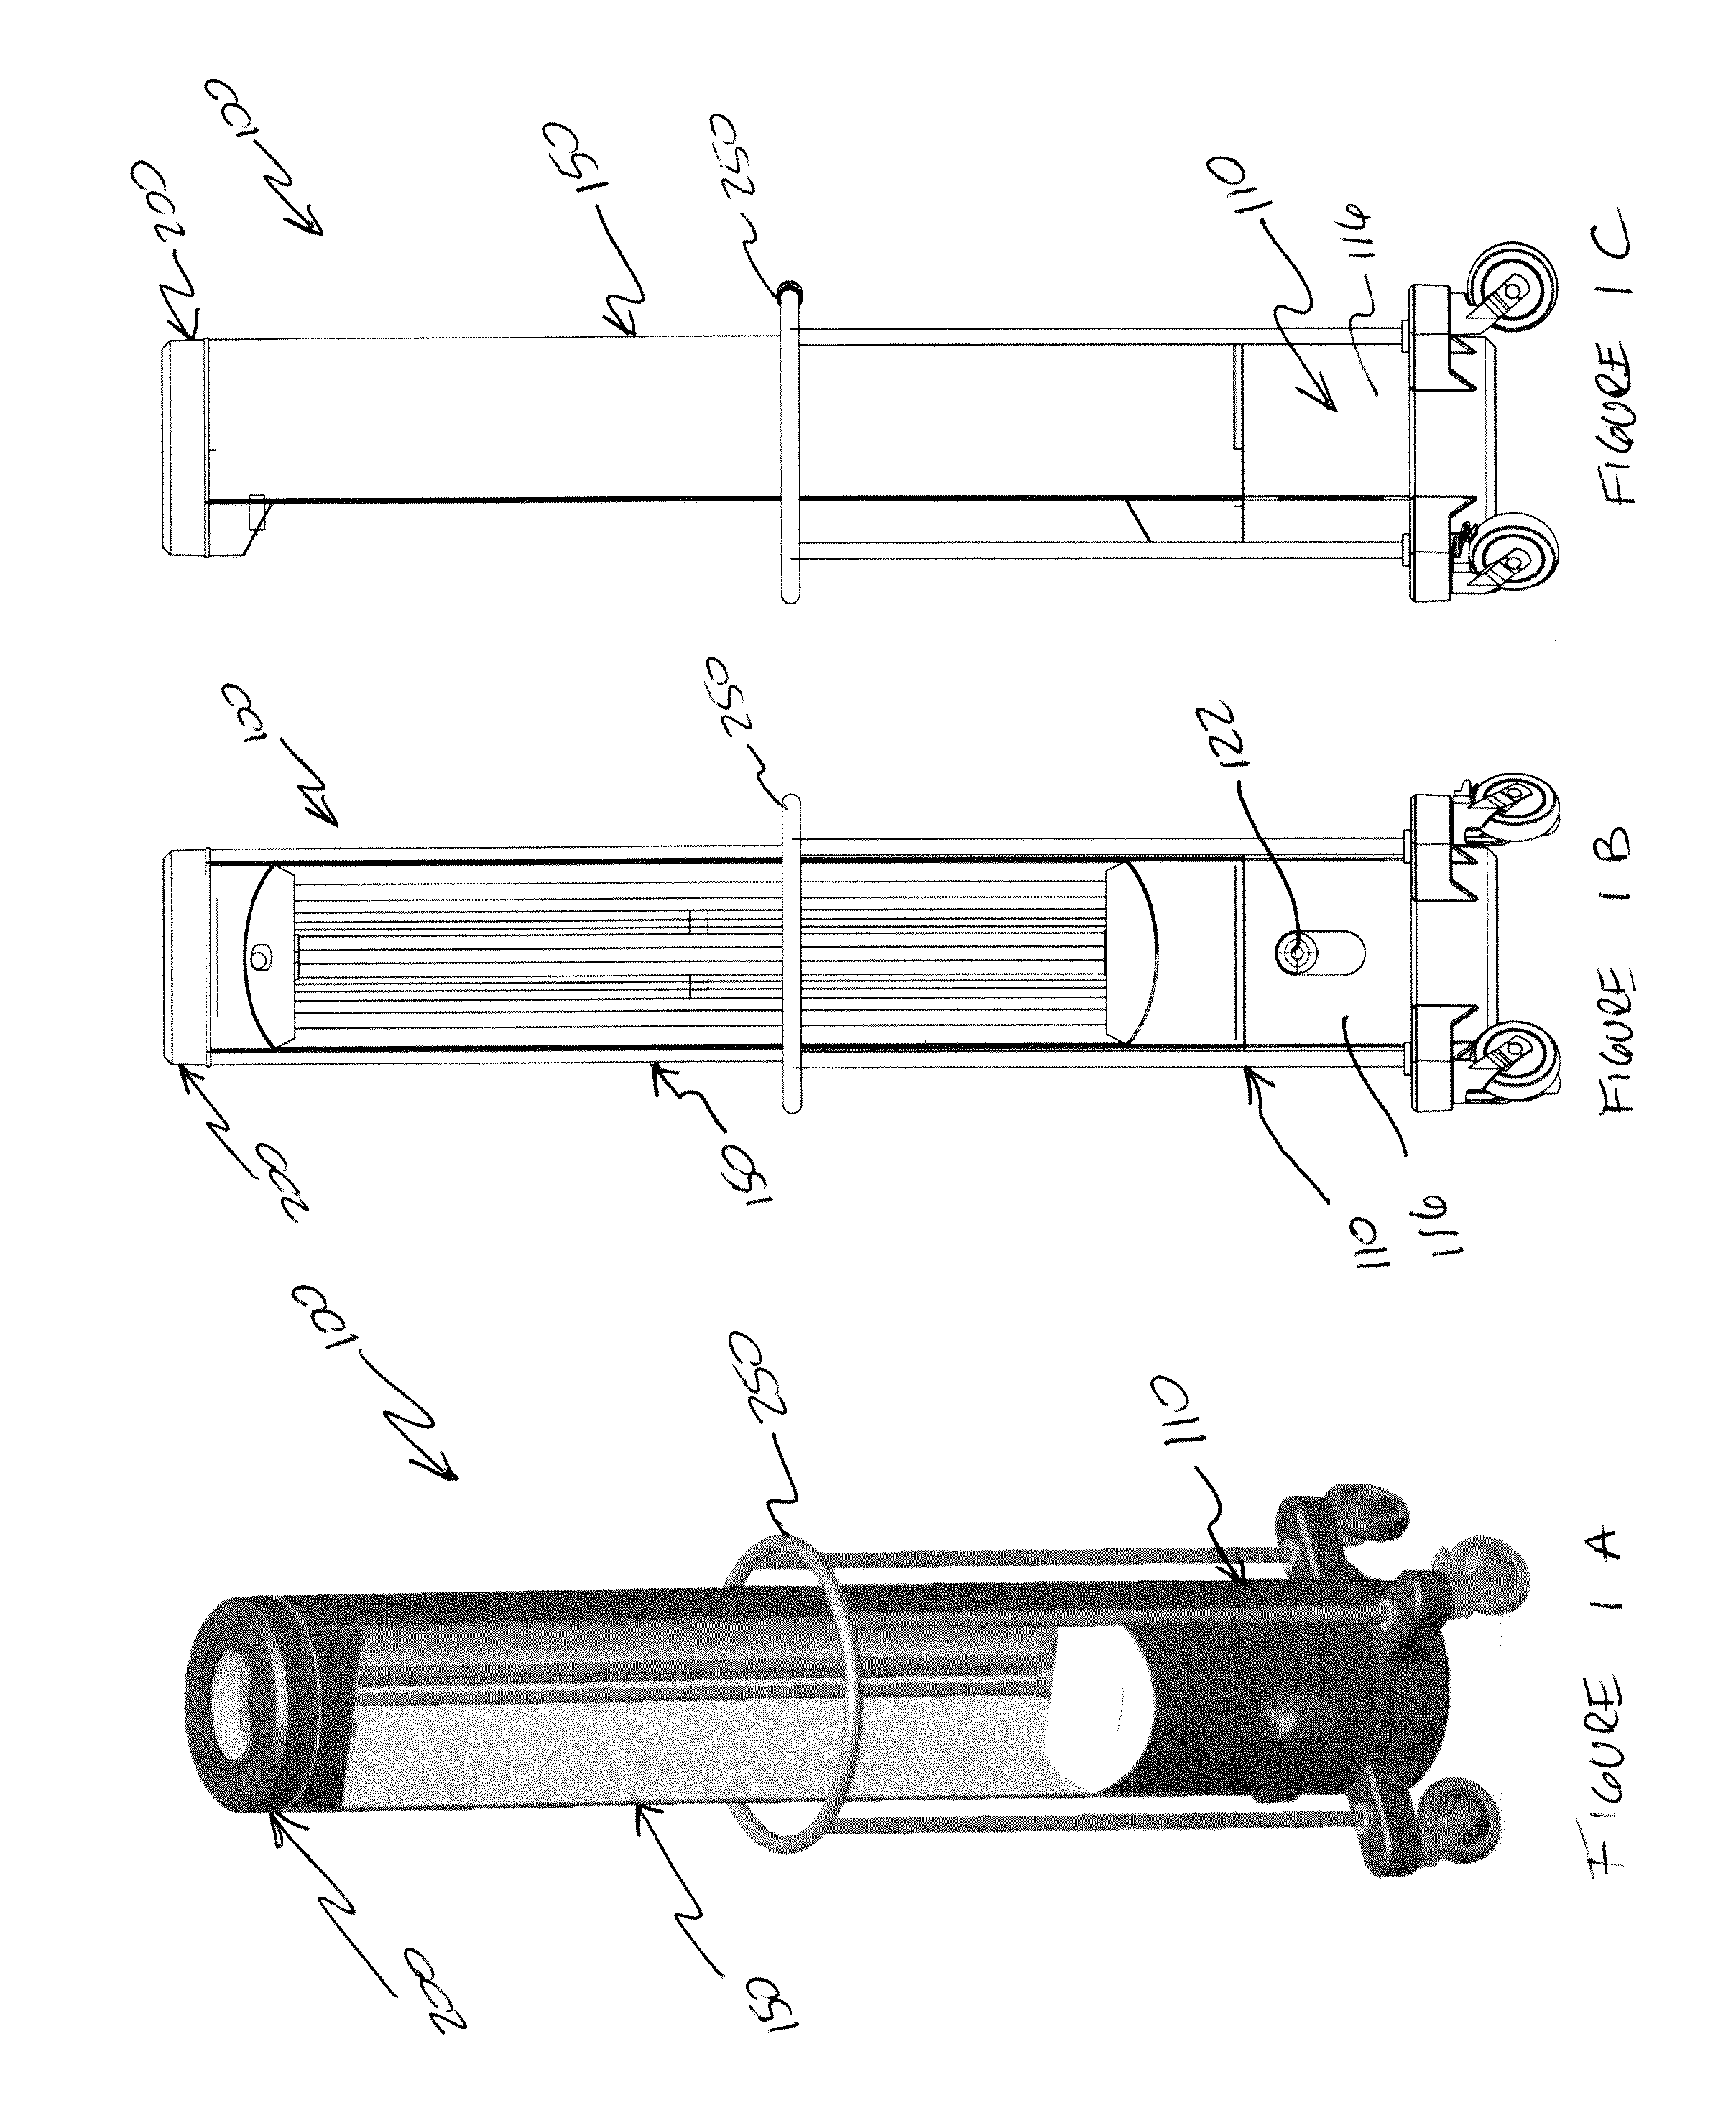 Hard surface disinfection system and method